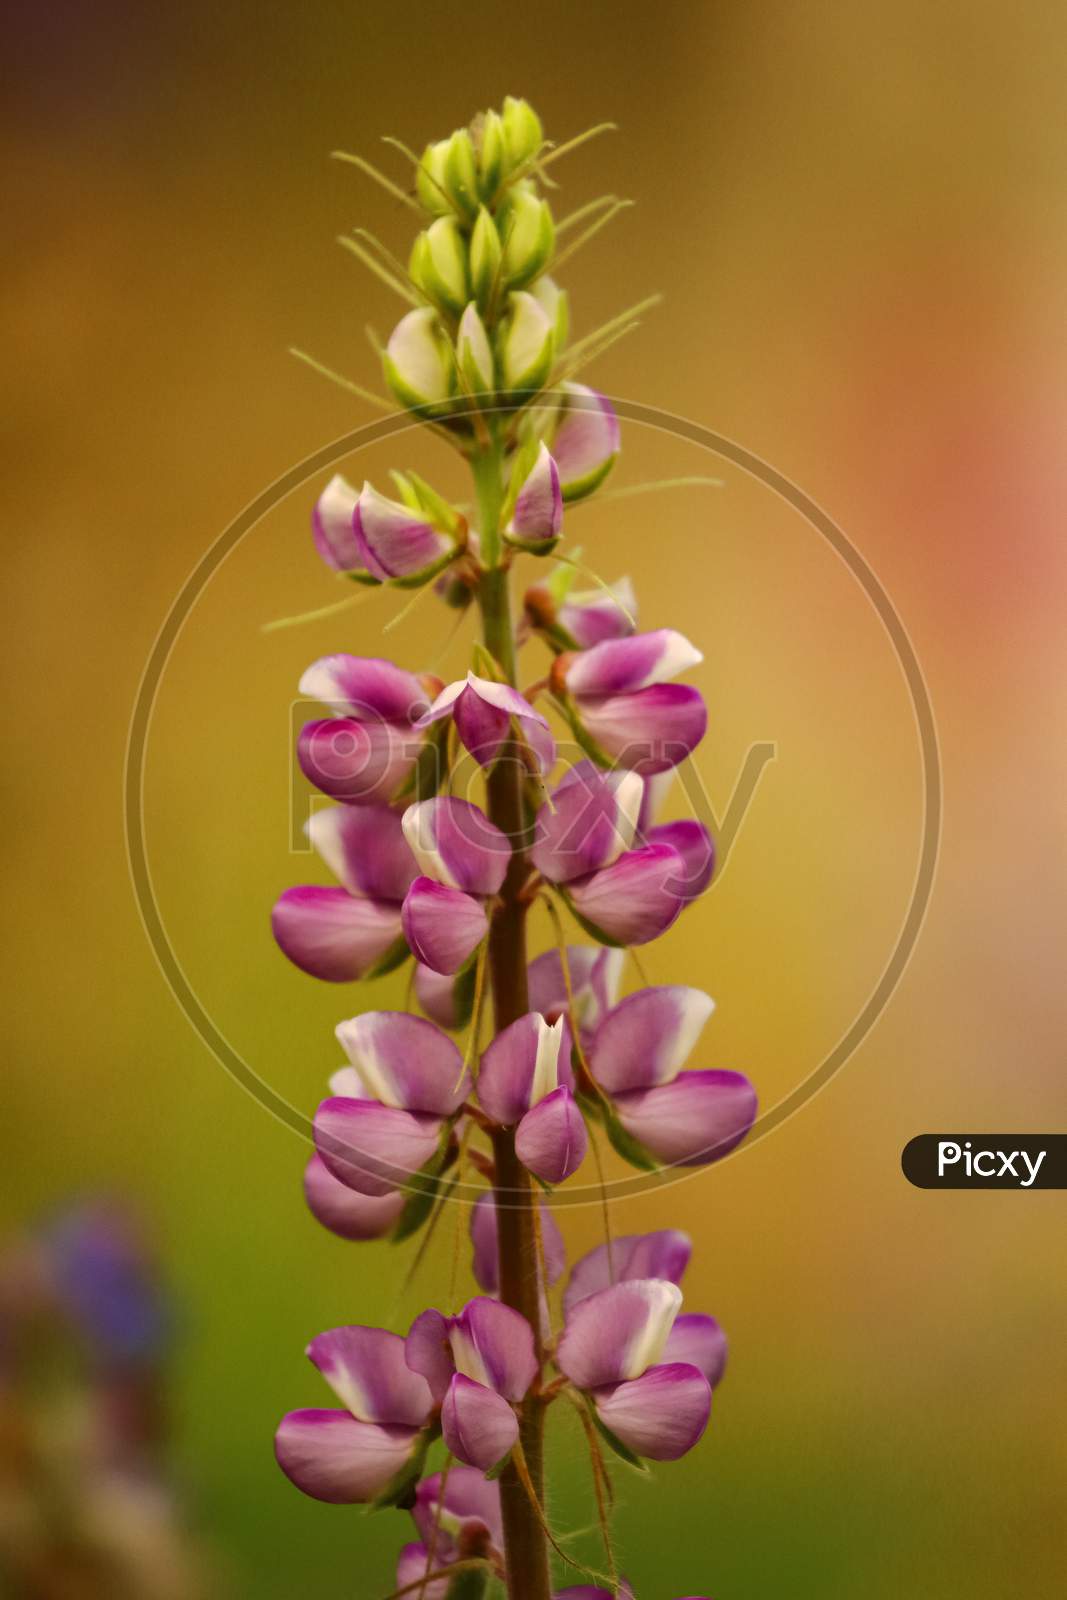 Macro image in very low light of a flower with vibrant colors and blur background